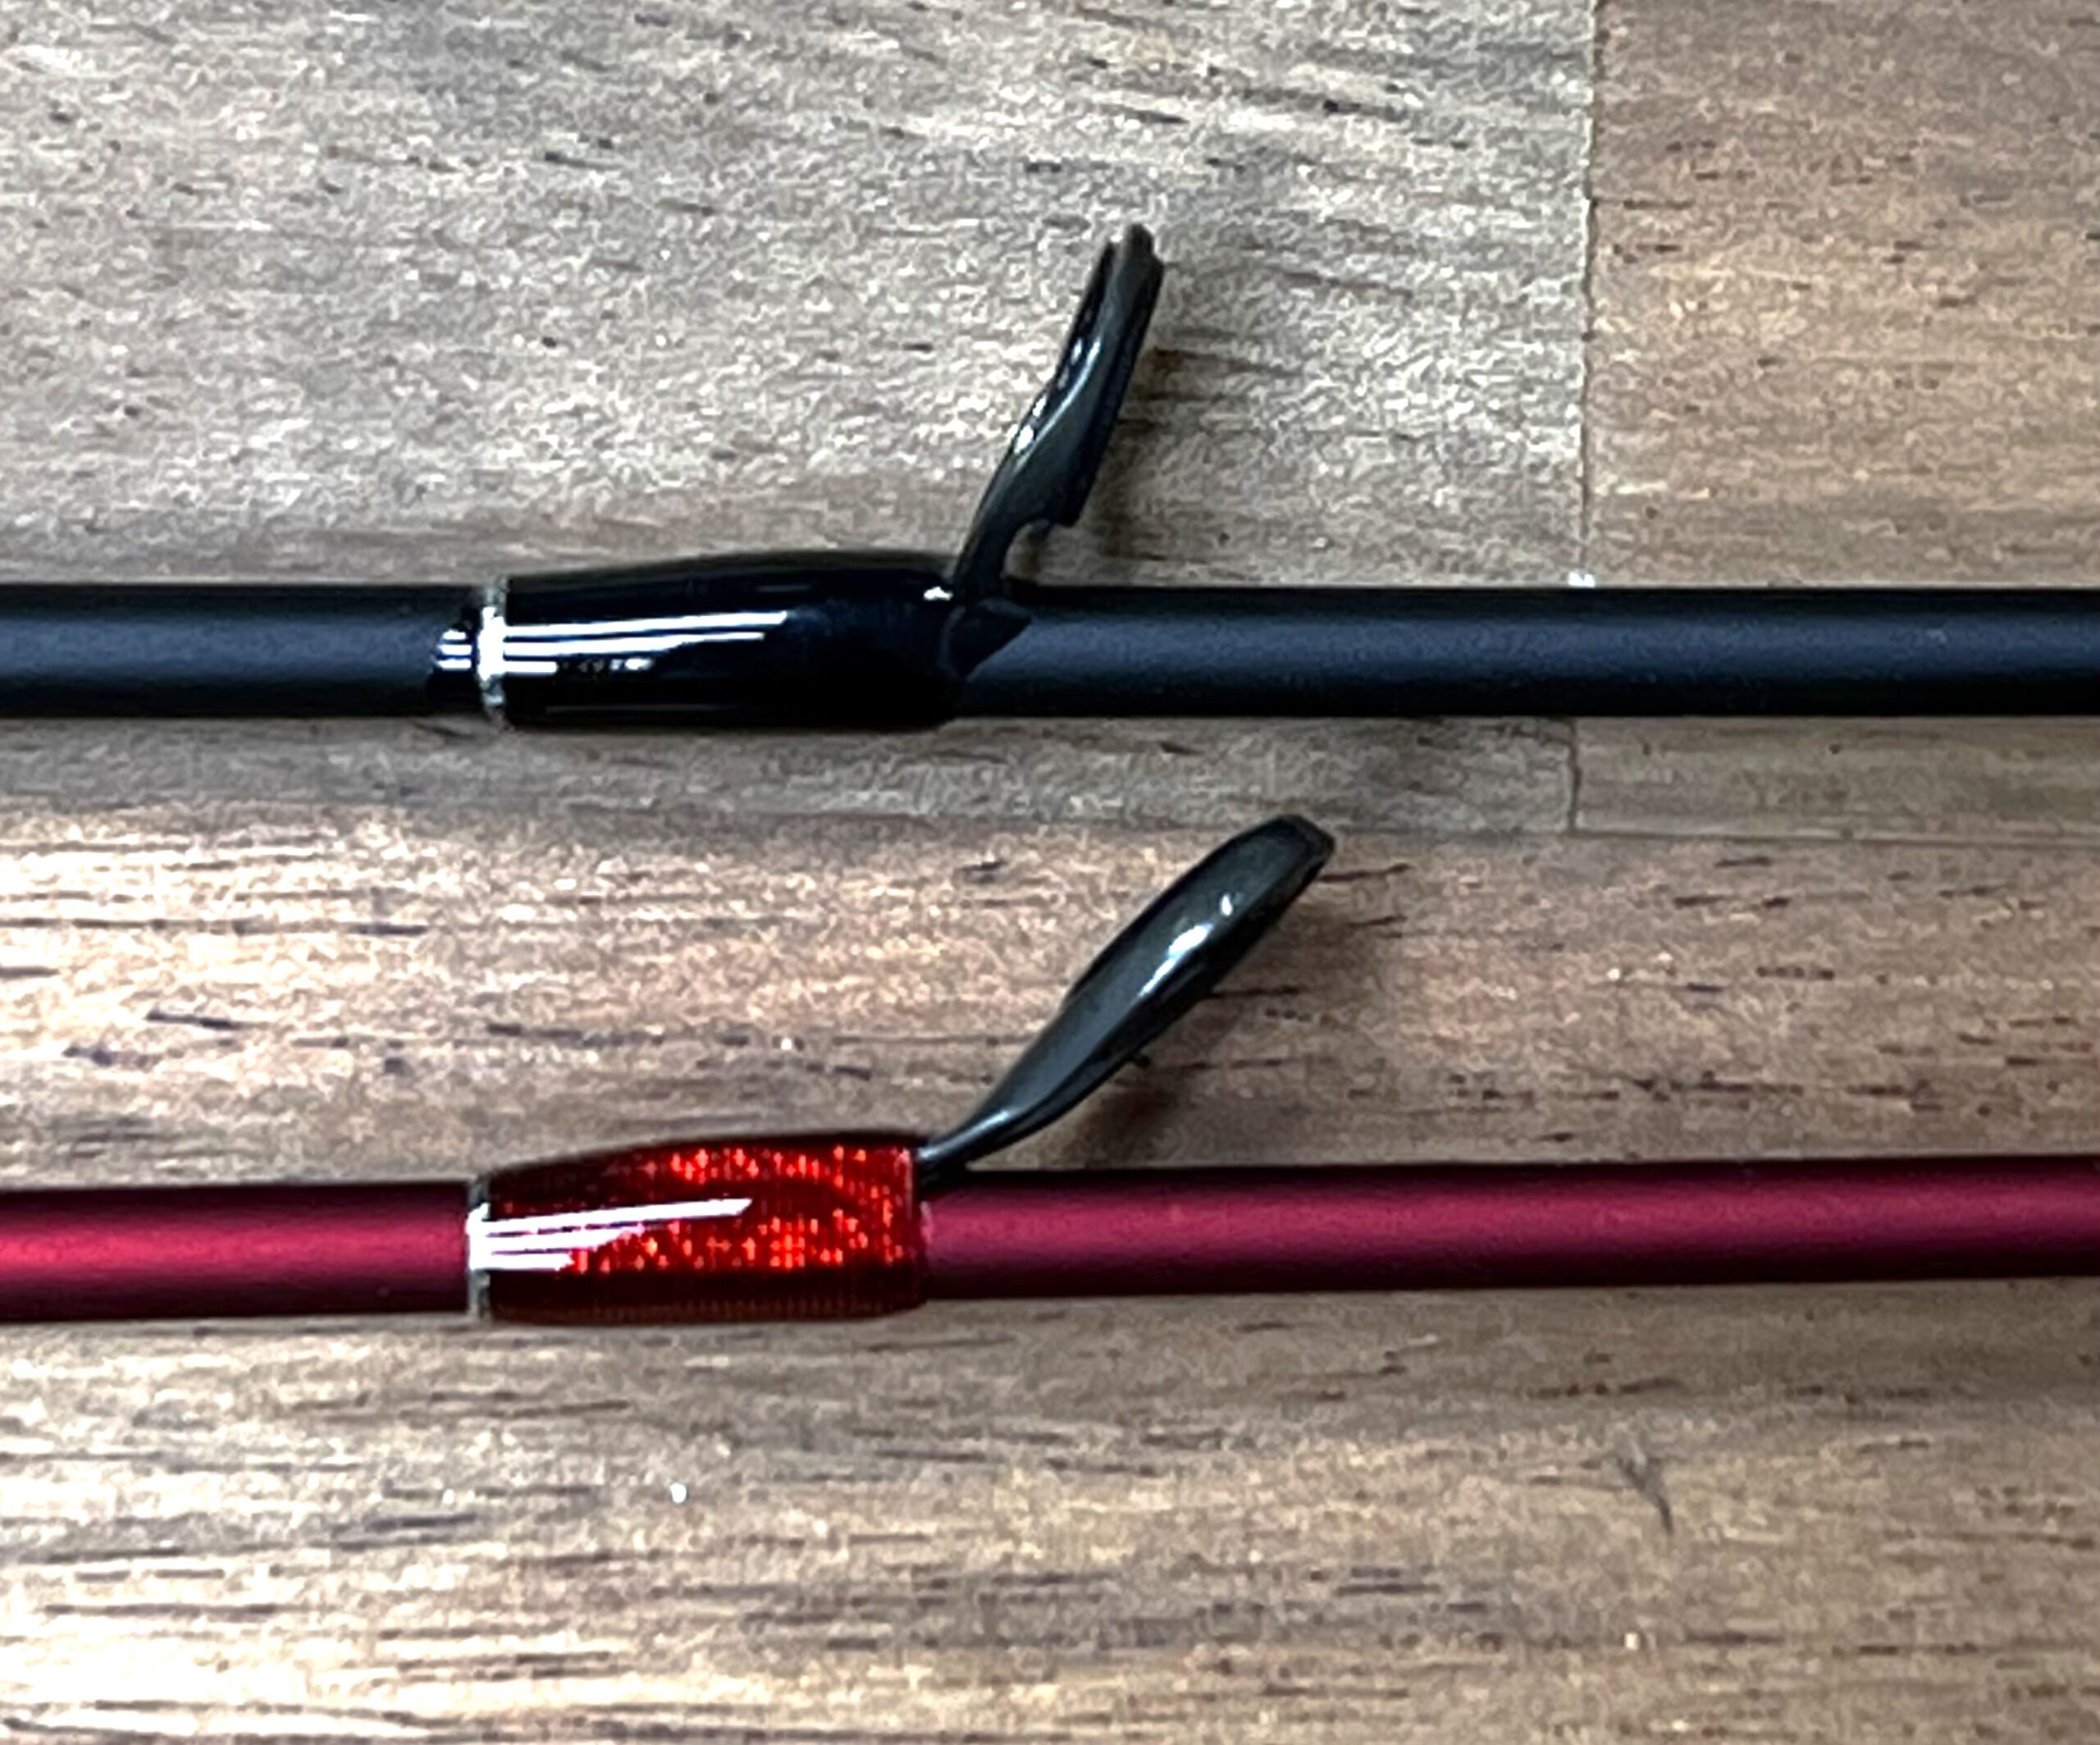 Common SPJ Rod Breakage Issues – How We Improved Our Rods and Eliminated Tip  Wraps - Temple Reef